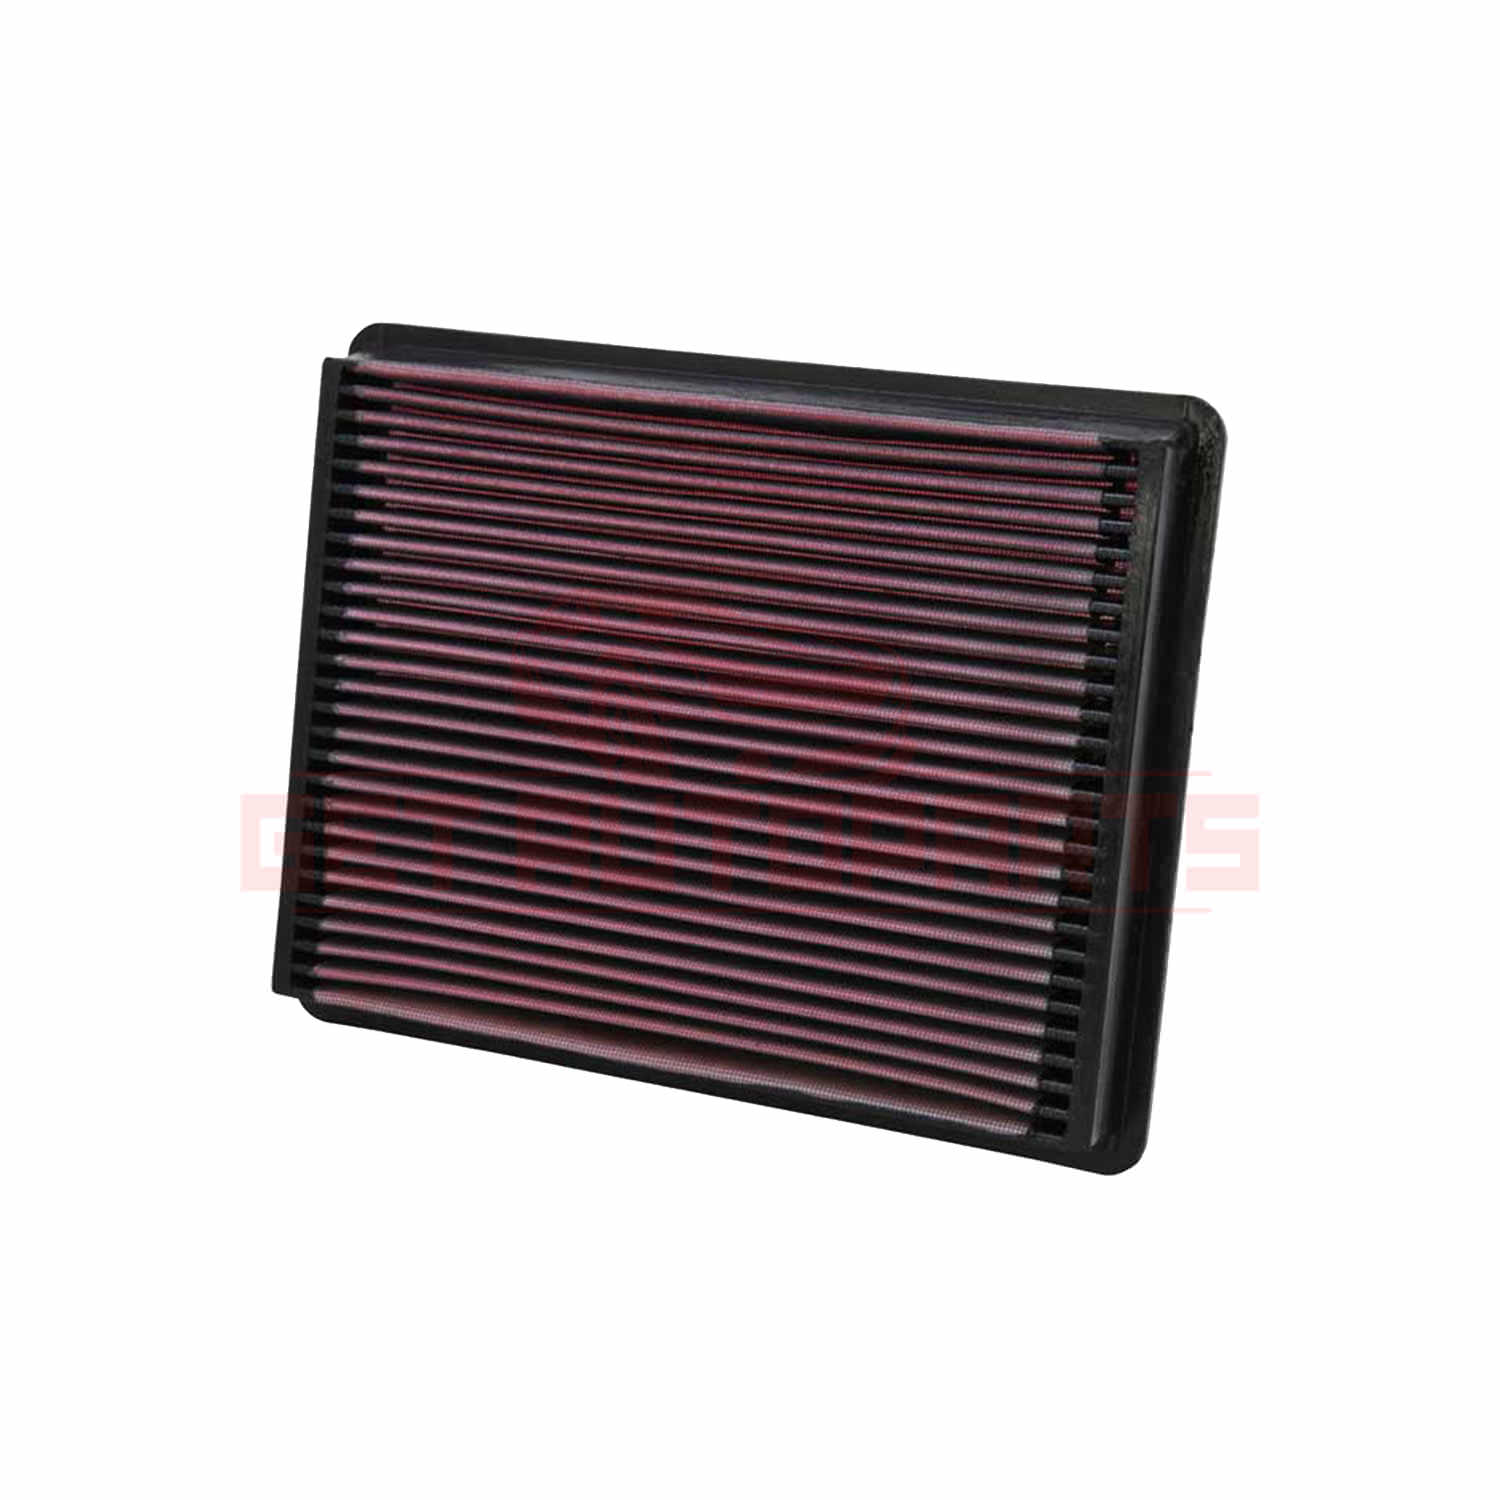 K&N Replacement Air Filter for GMC Sierra 1500 Classic 2007